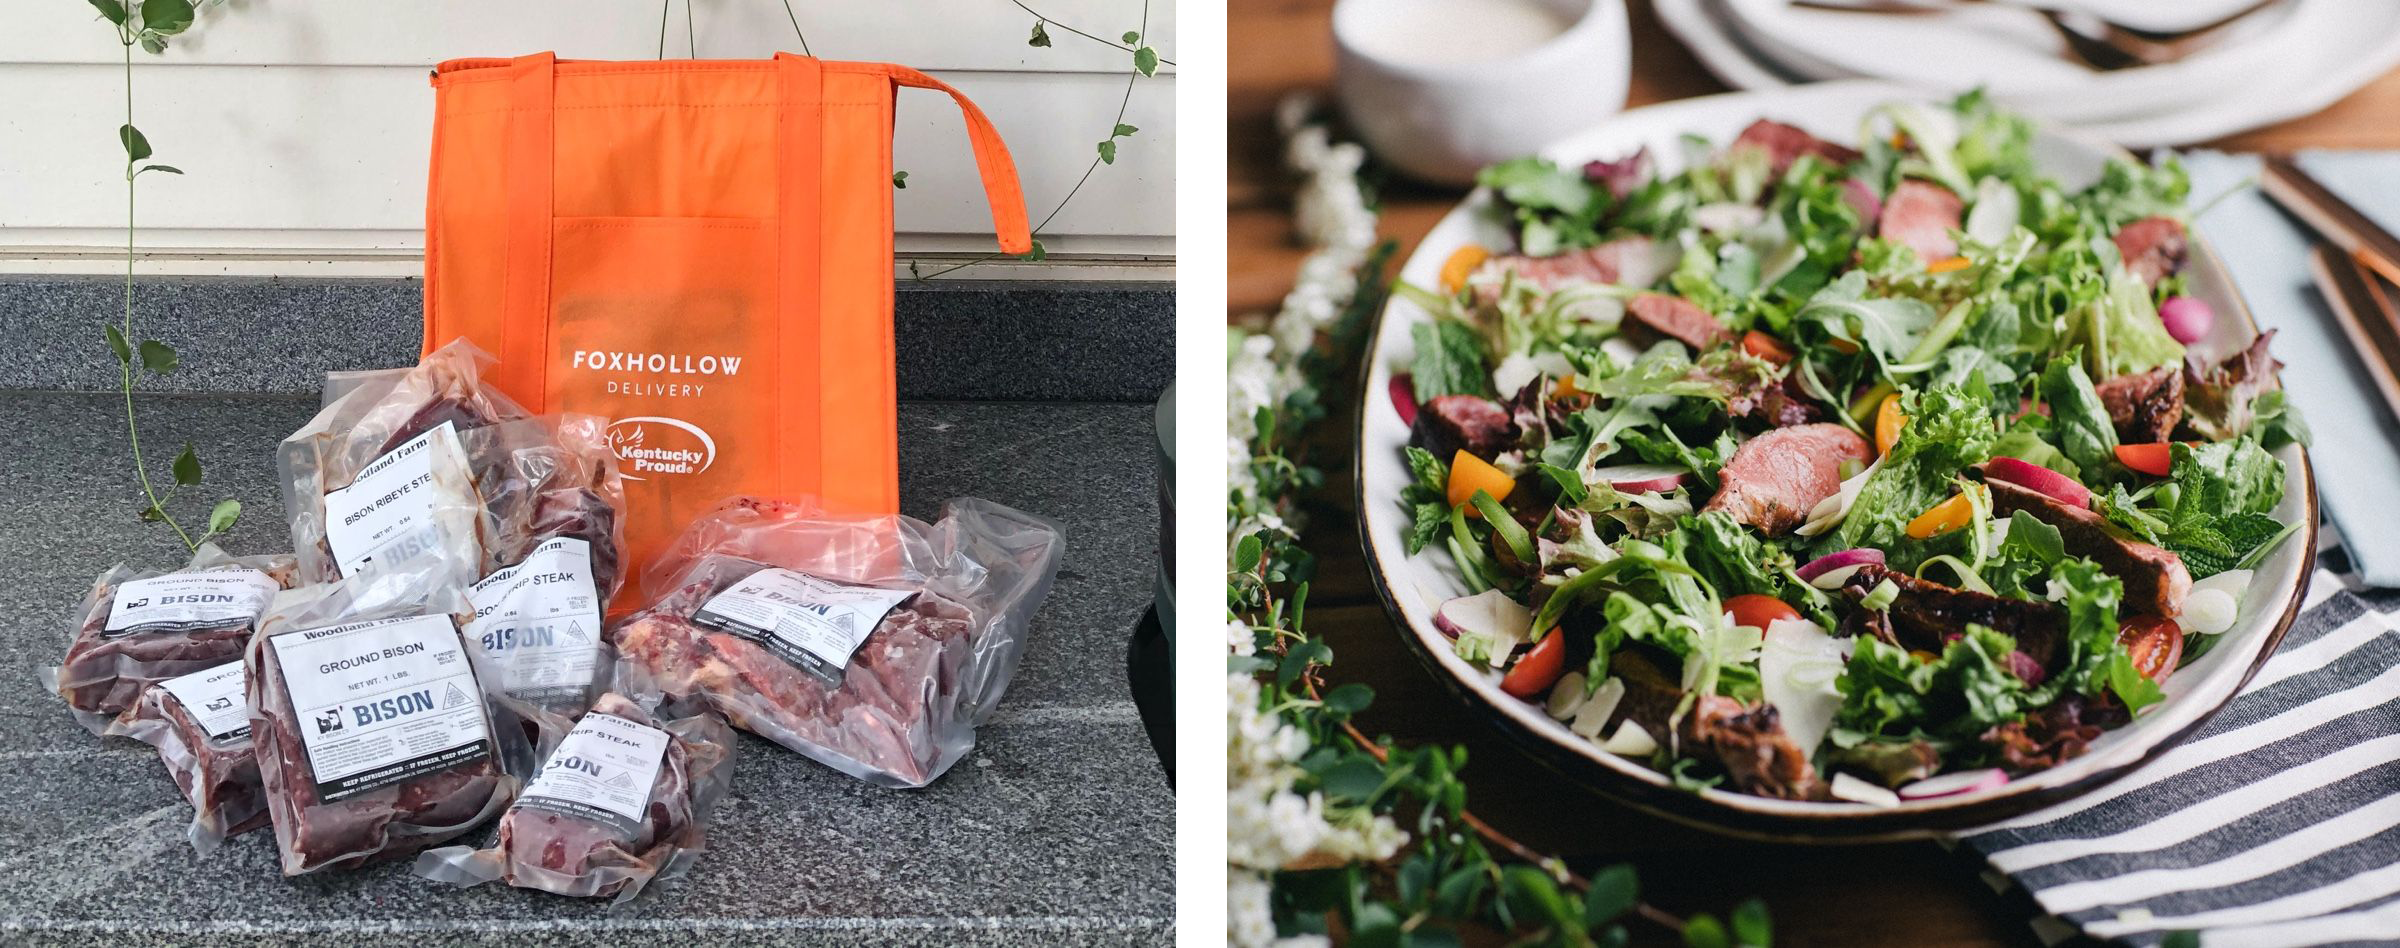 Left: Foxhollow Farm orange reusable bag with packaged meat. Right: Salad in bowl.